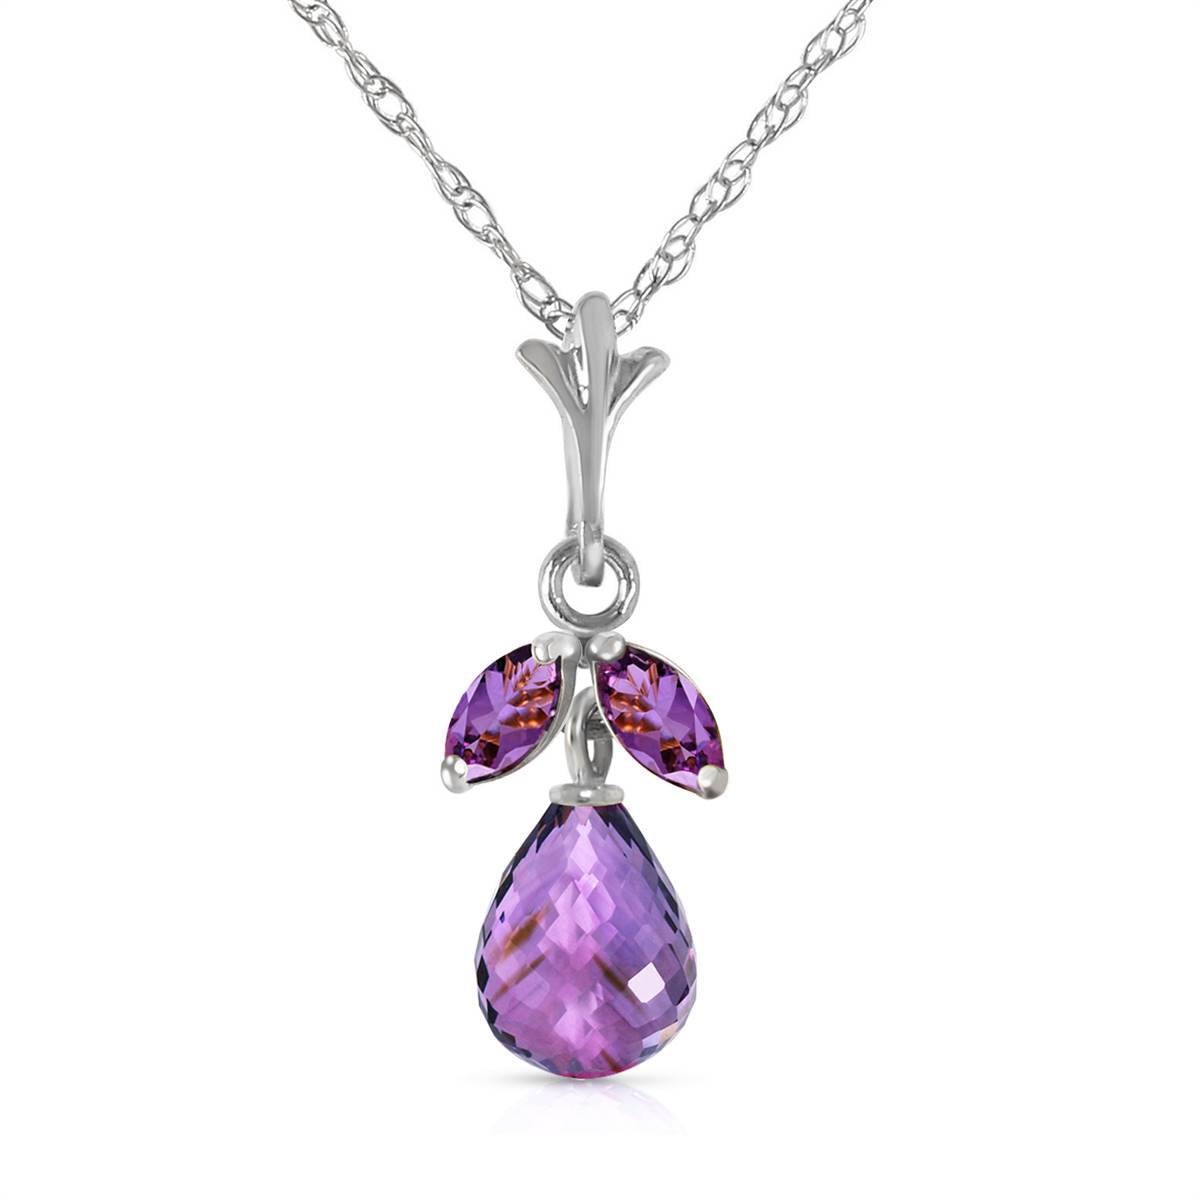 1.7 Carat 14K Solid White Gold Close Enough Amethyst Necklace